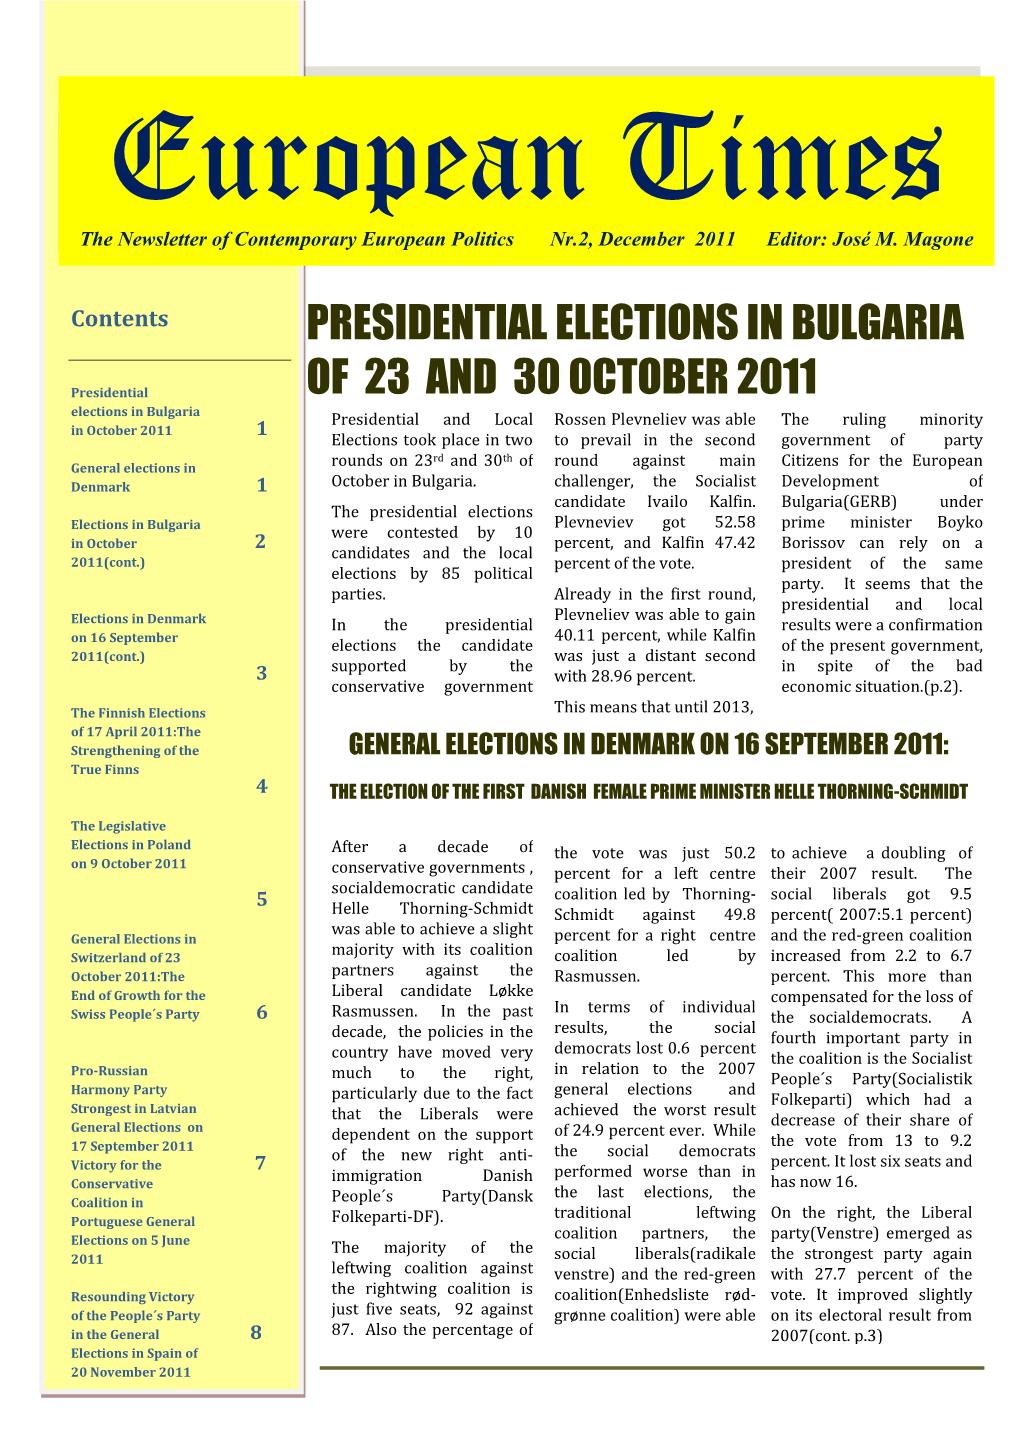 Presidential Elections in Bulgaria of 23 and 30